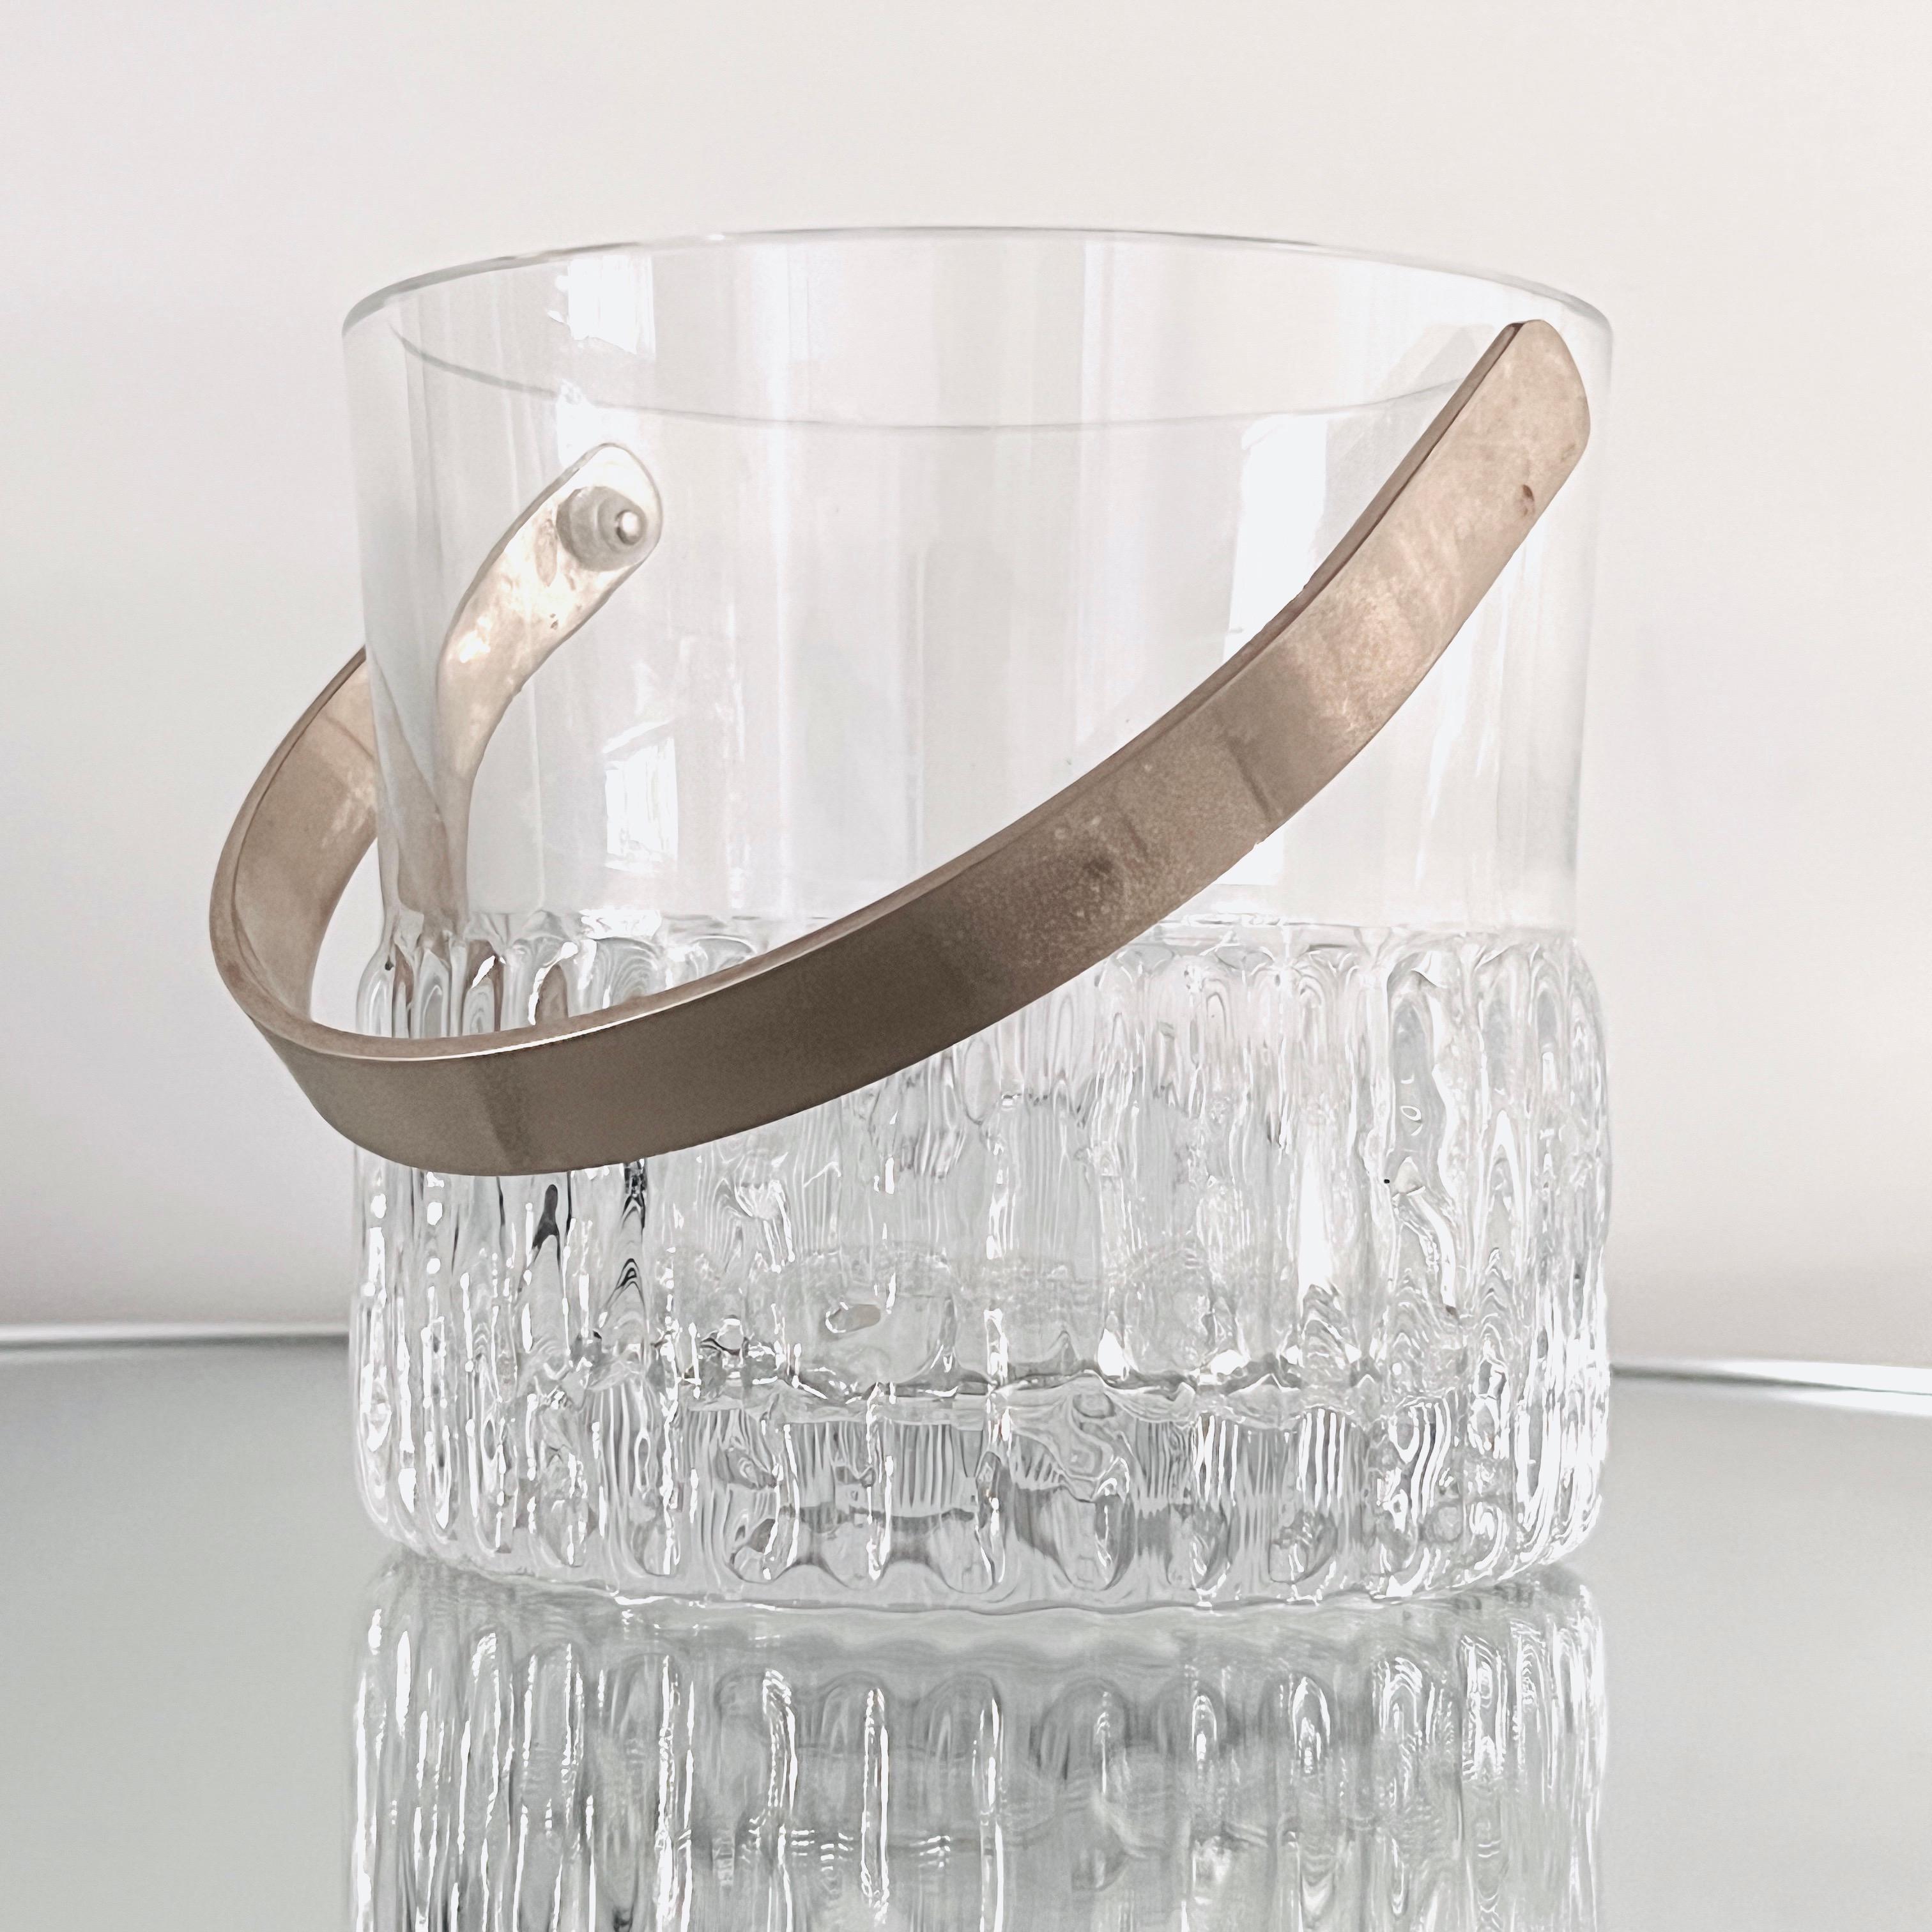 Brushed Mid-Century Modern Crystal Ice Bucket with Textured Glass, France, c. 1970s For Sale